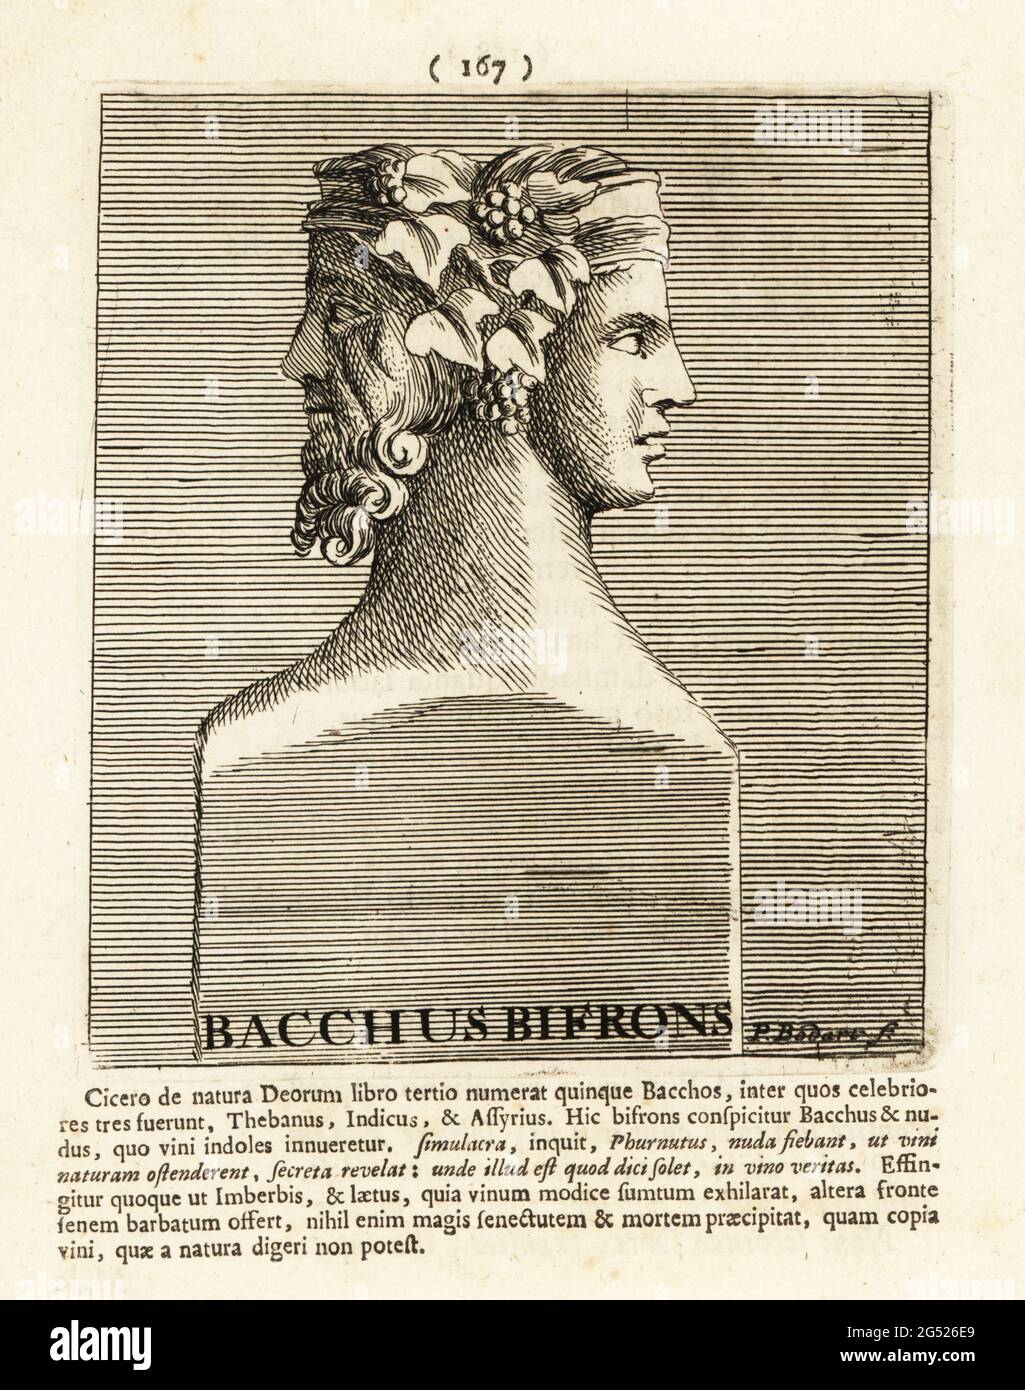 Bacchus Bifrons, with two heads facing in opposite directions, wearing vine leaves and grapes. Roman god of fertility, celebration, ritual, wine and intoxication. Dionysus in Greek mythology. Copperplate engraving by Pieter Bodart (1676-1712) from Henricus Spoor’s Deorum et Heroum, Virorum et Mulierum Illustrium Imagines Antiquae Illustatae, Gods and Heroes, Men and Women, Illustrated with Antique Images, Petrum, Amsterdam, 1715. First published as Favissæ utriusque antiquitatis tam Romanæ quam Græcæ in 1707. Henricus Spoor was a Dutch physician, classical scholar, poet and writer, fl. 1694-17 Stock Photo